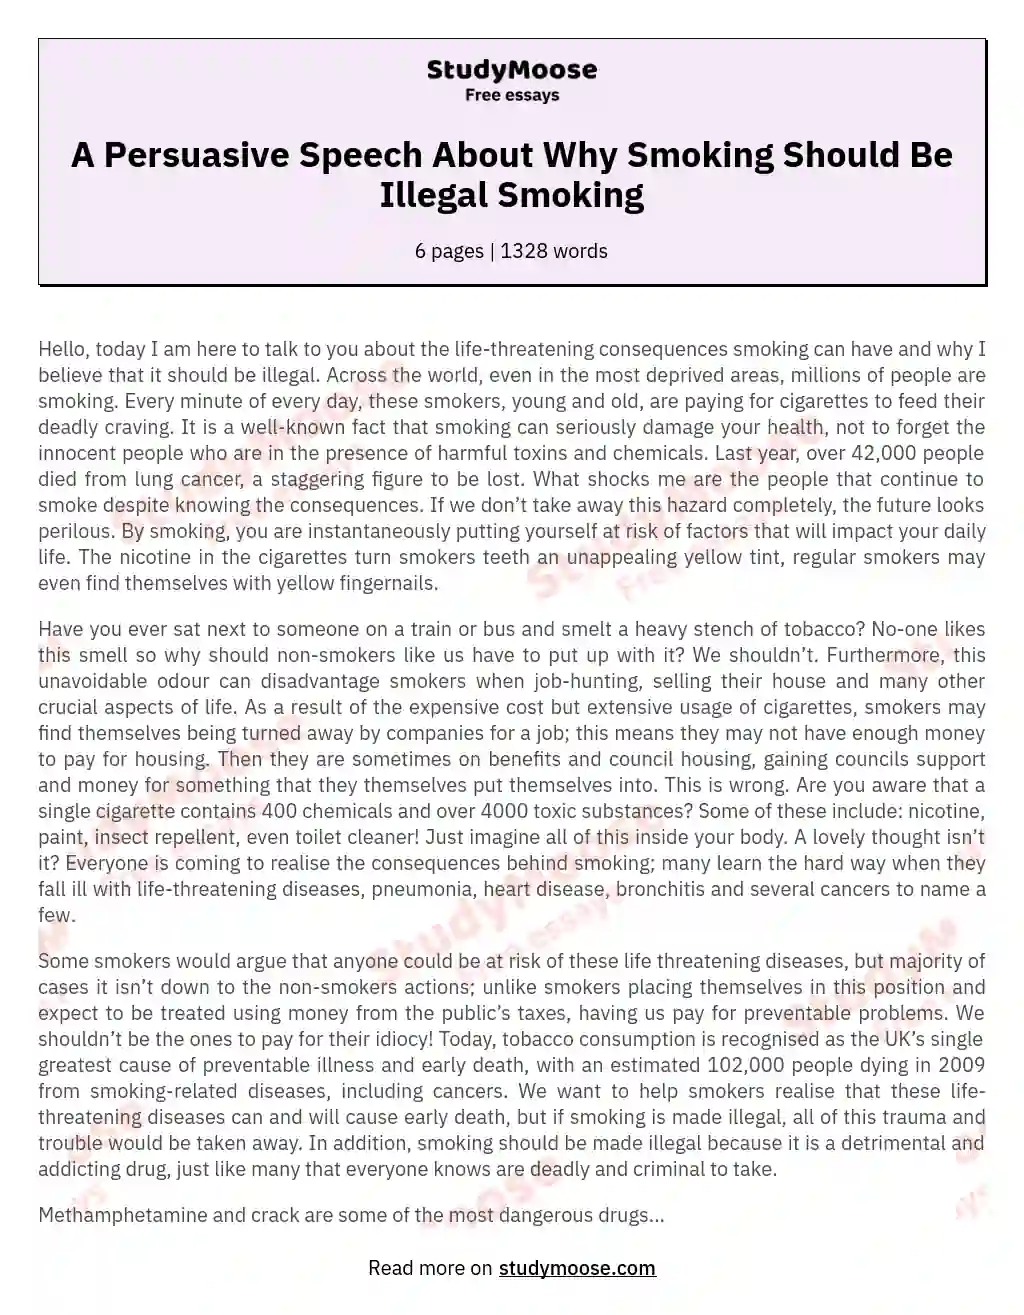 A Persuasive Speech About Why Smoking Should Be Illegal Smoking essay